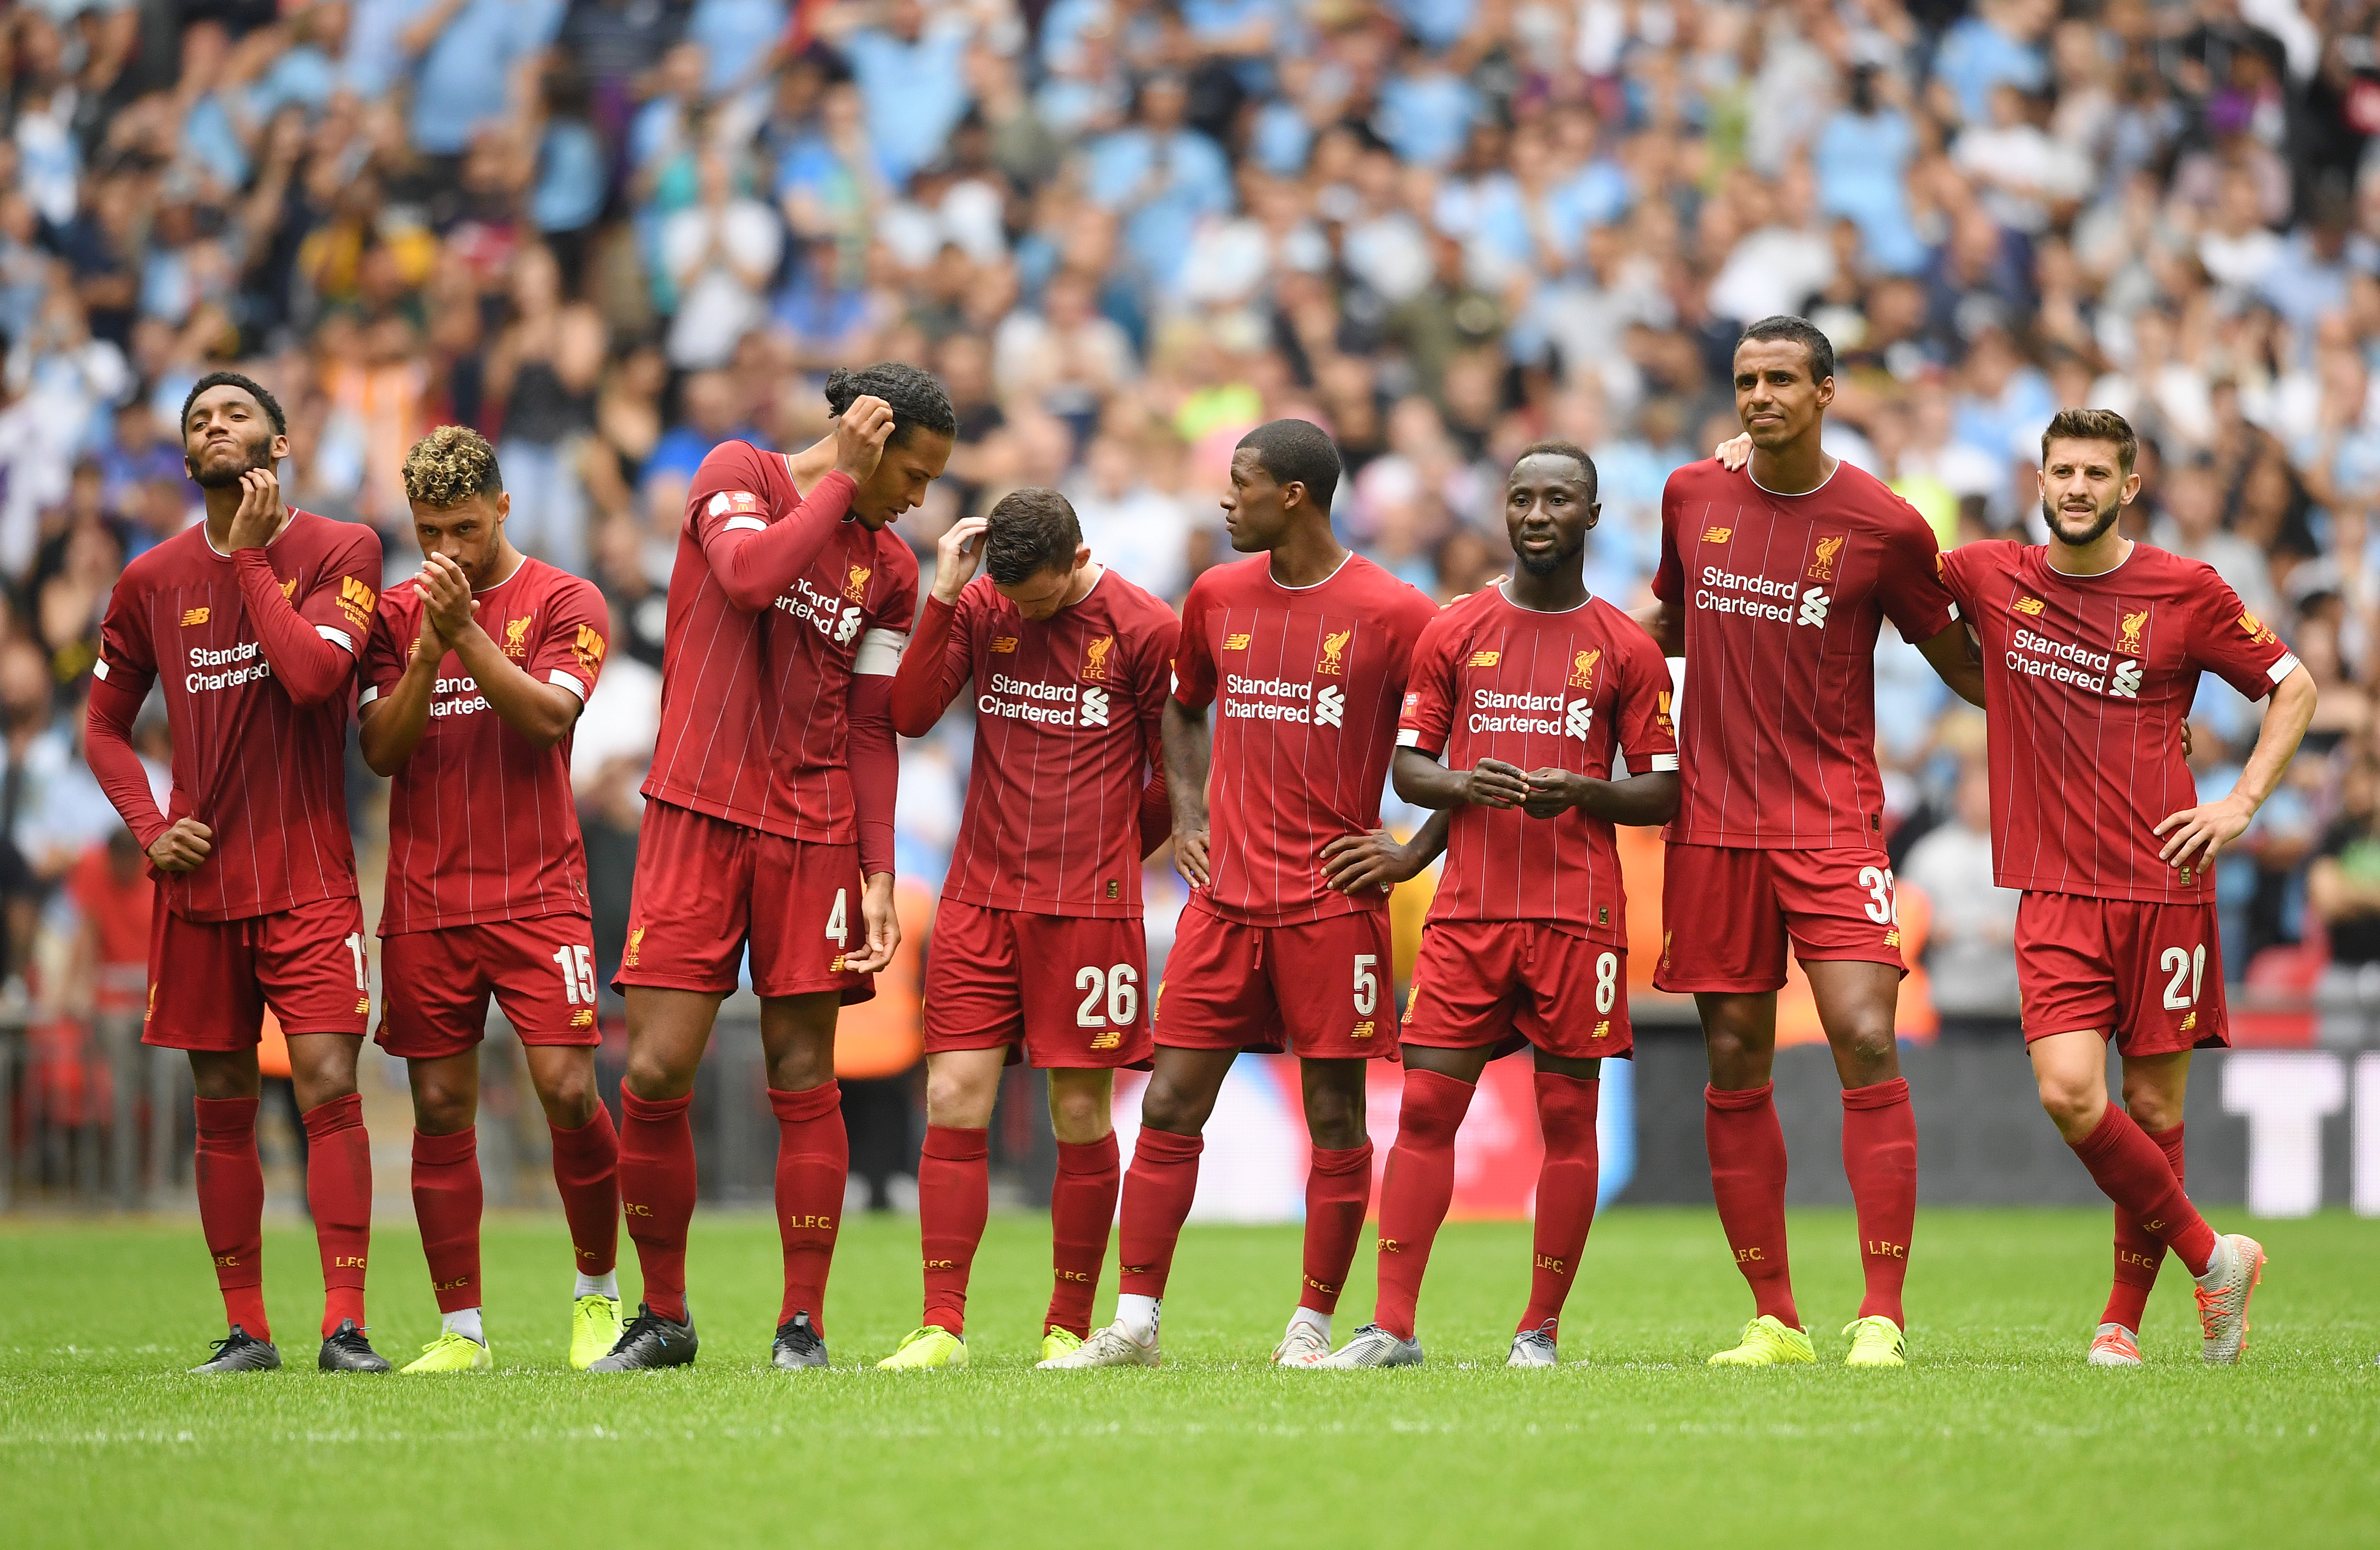 Liverpool began their season with a defeat to Manchester City in the Community Shield. (Photo by Michael Regan/Getty Images)